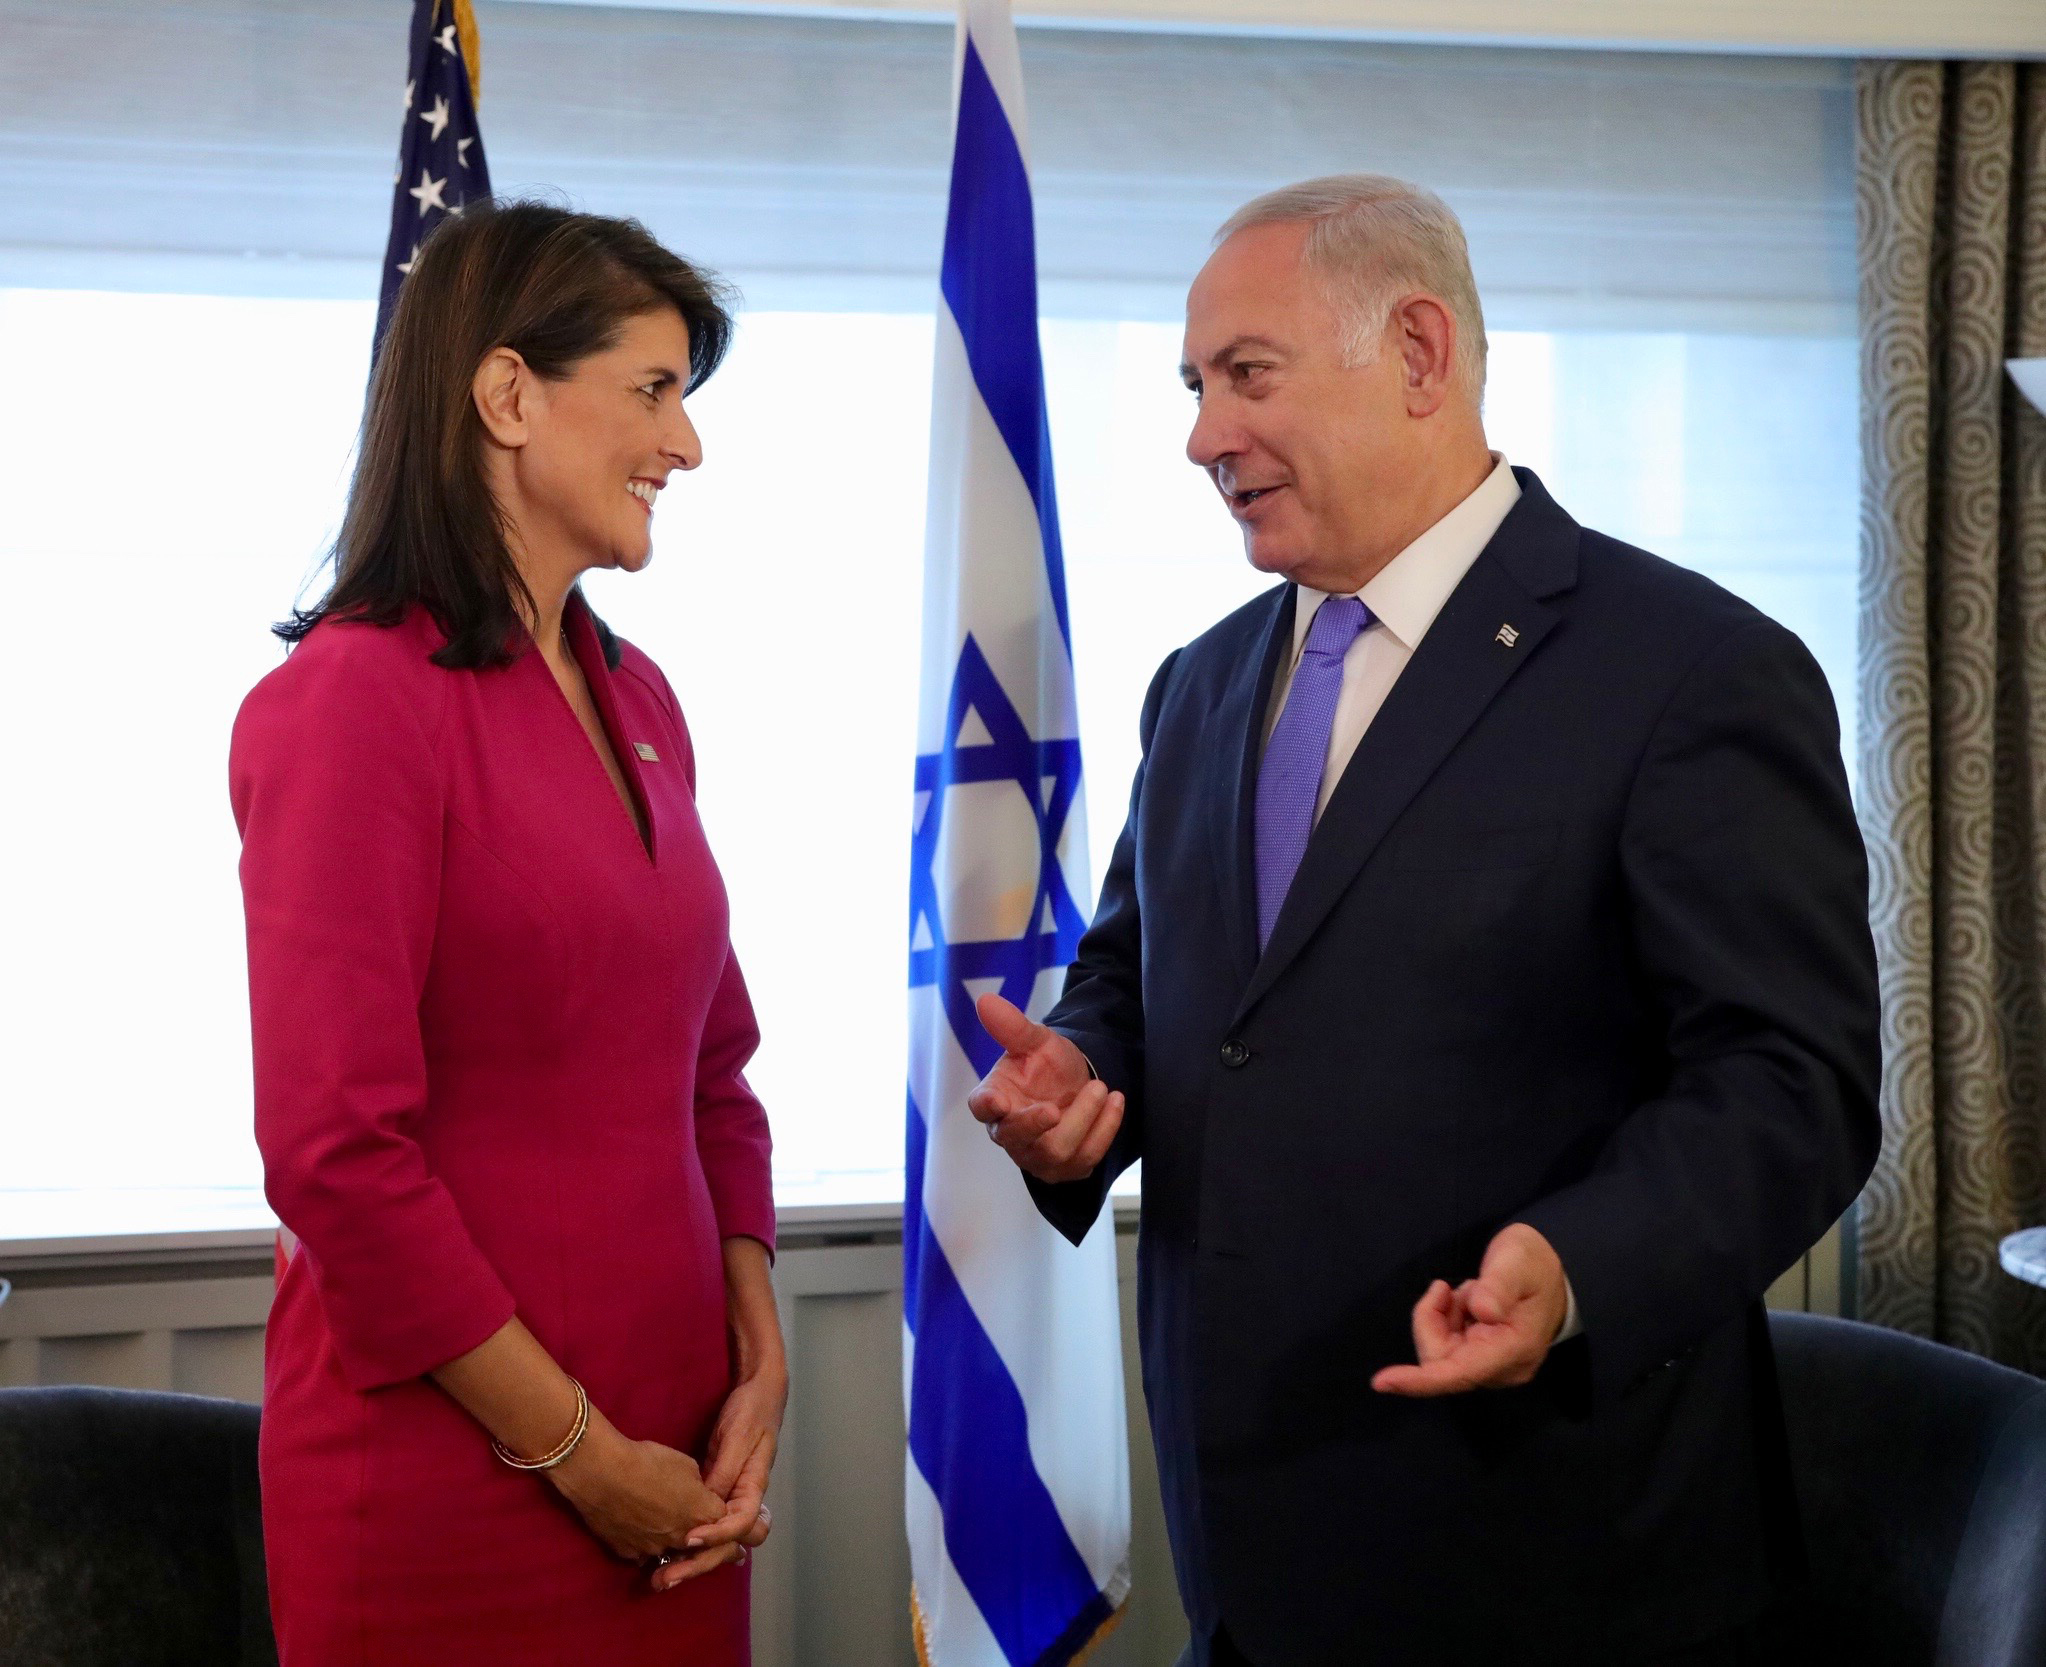 Ambassador Haley meets with Prime Minster Netanyahu to discuss U.S.-Israeli relations during UN High Level Week in New York City, 2018.